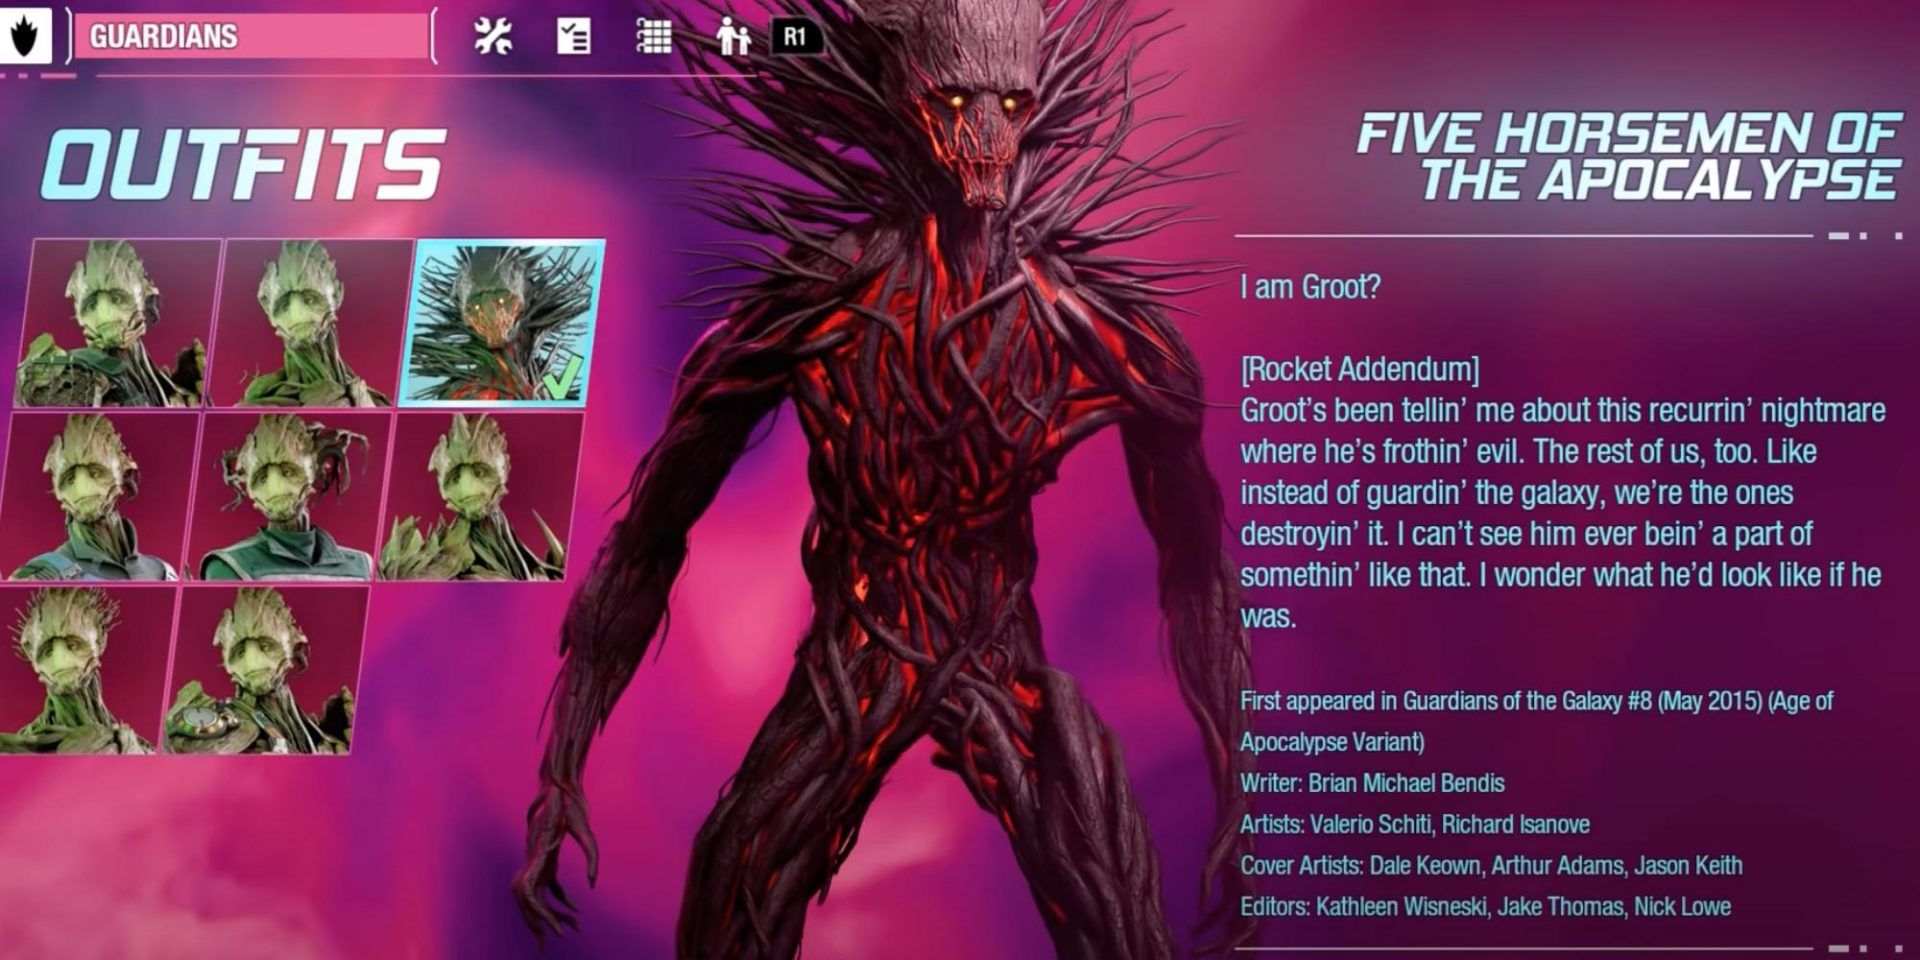 Marvel's Guardians of the Galaxy Groot Apocalypse Horsemen Outfit